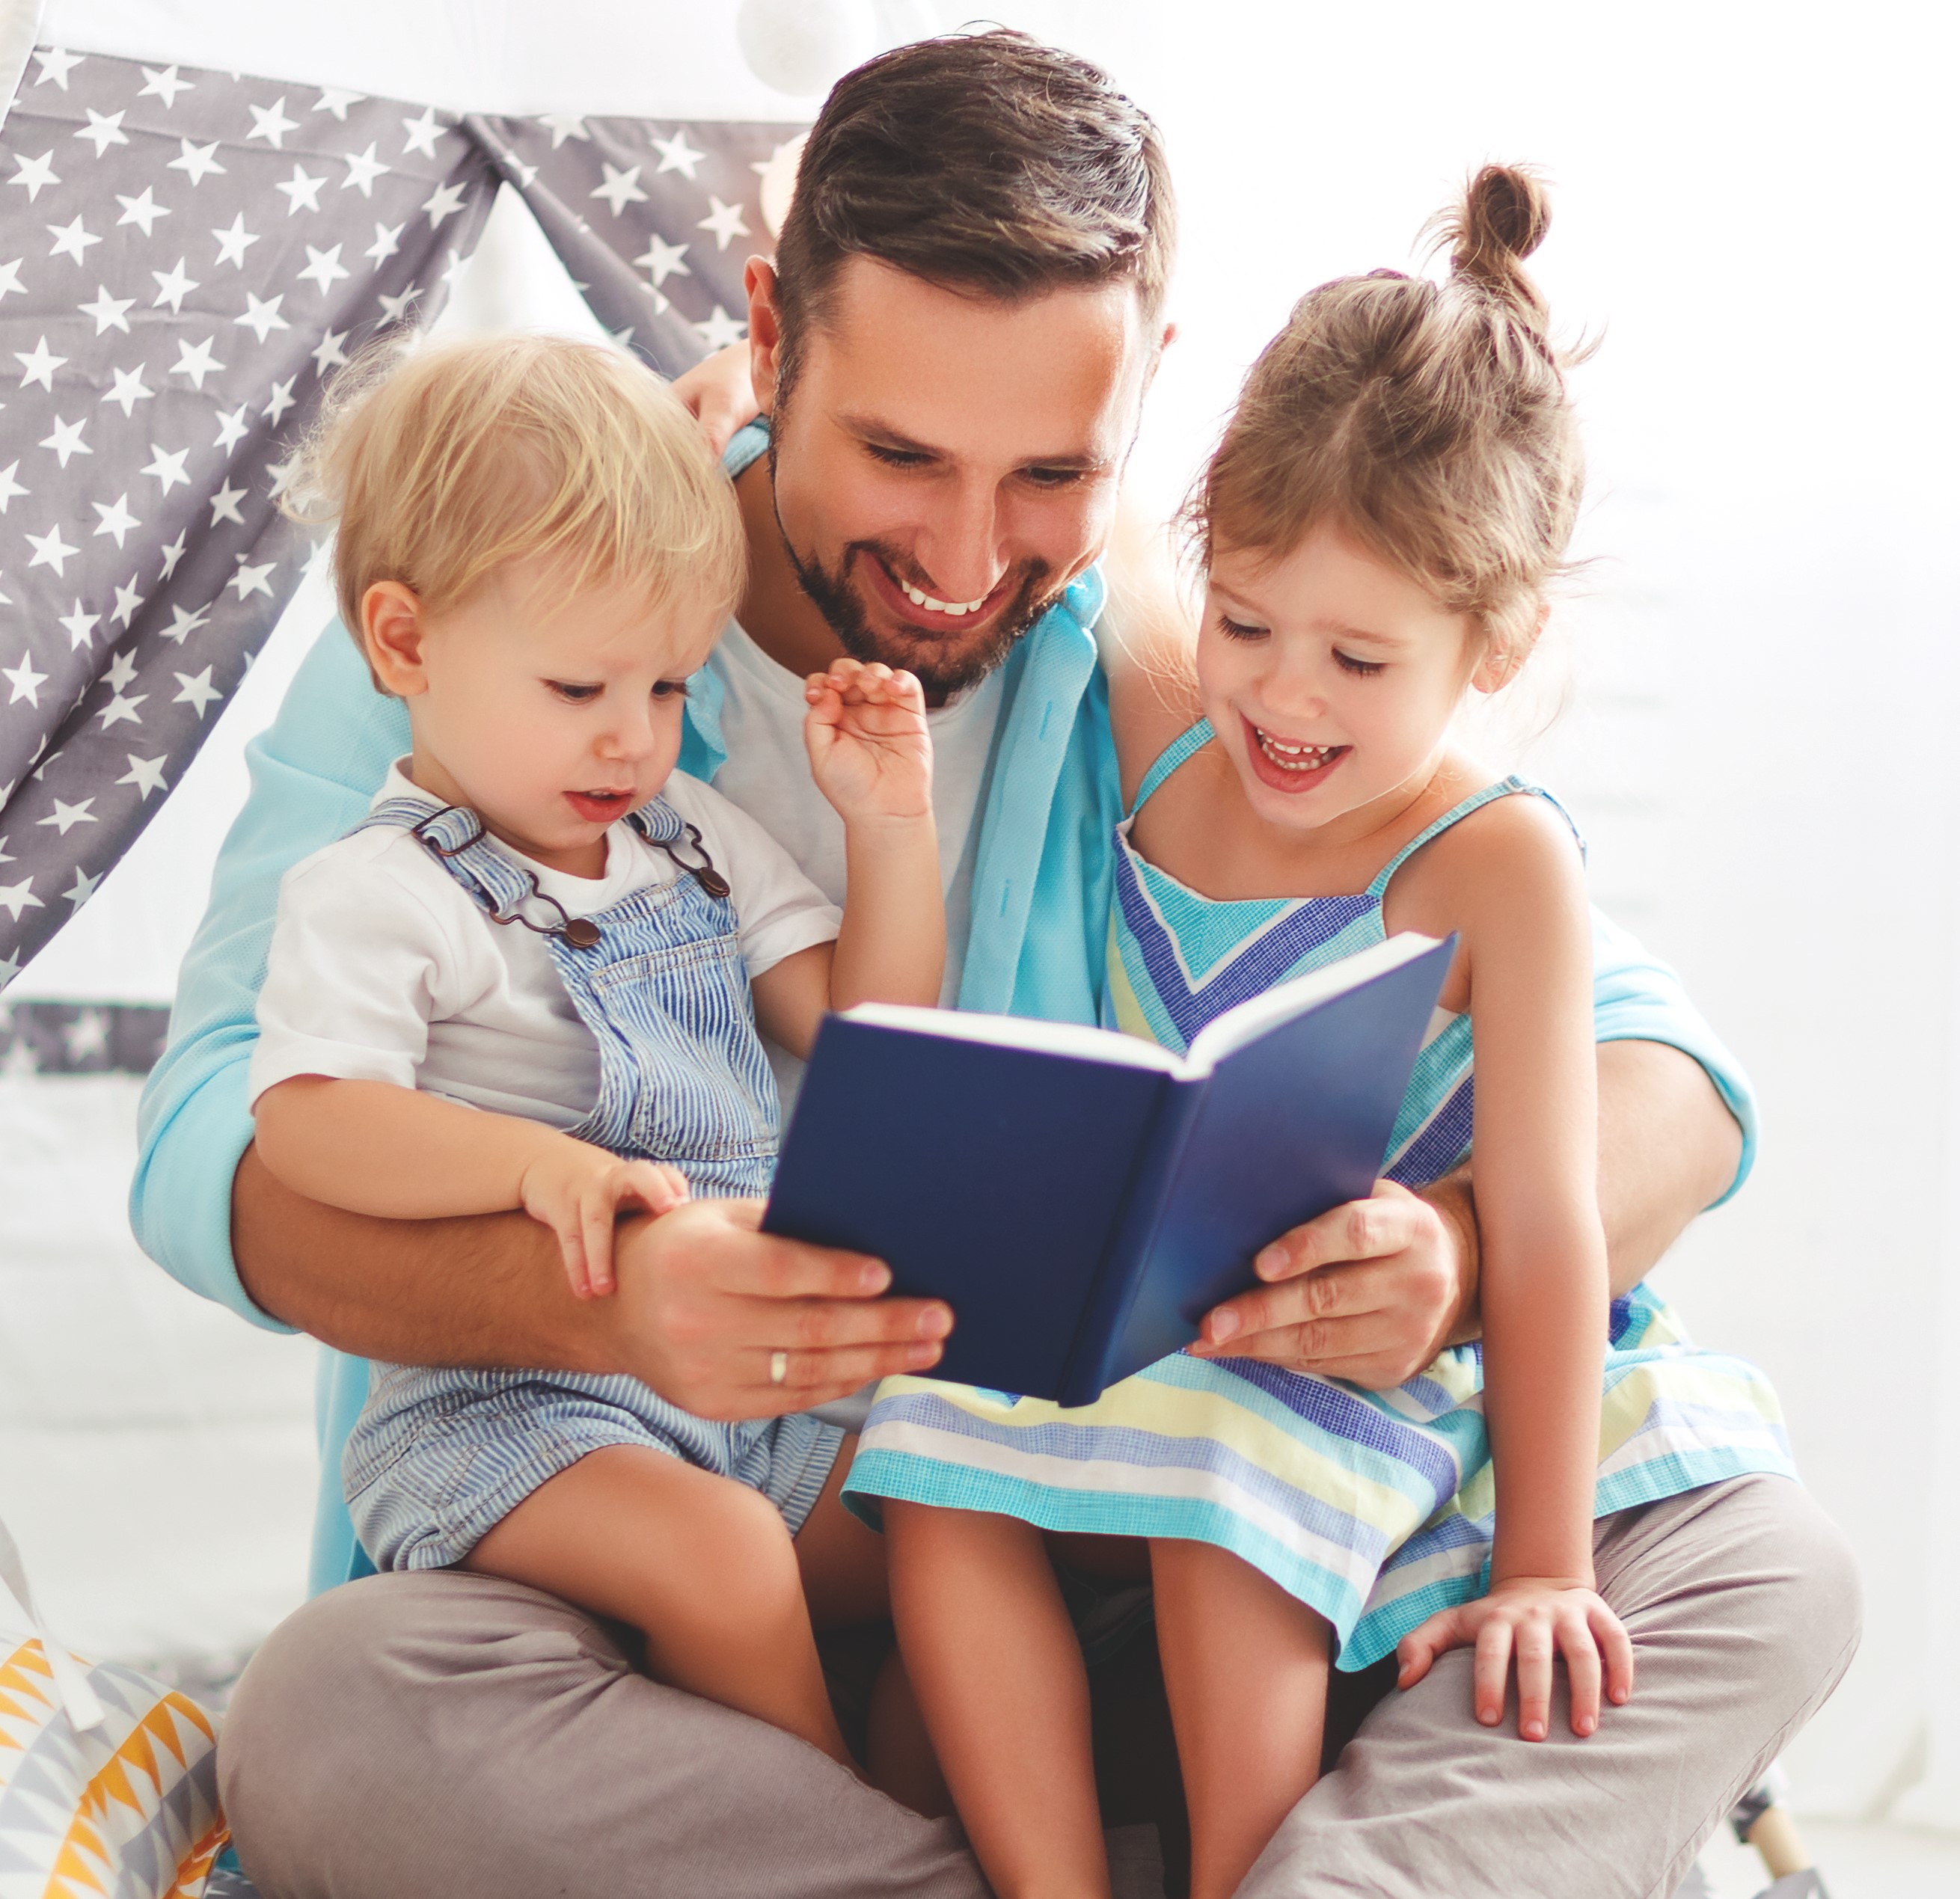 Image of a dad reading to kids.